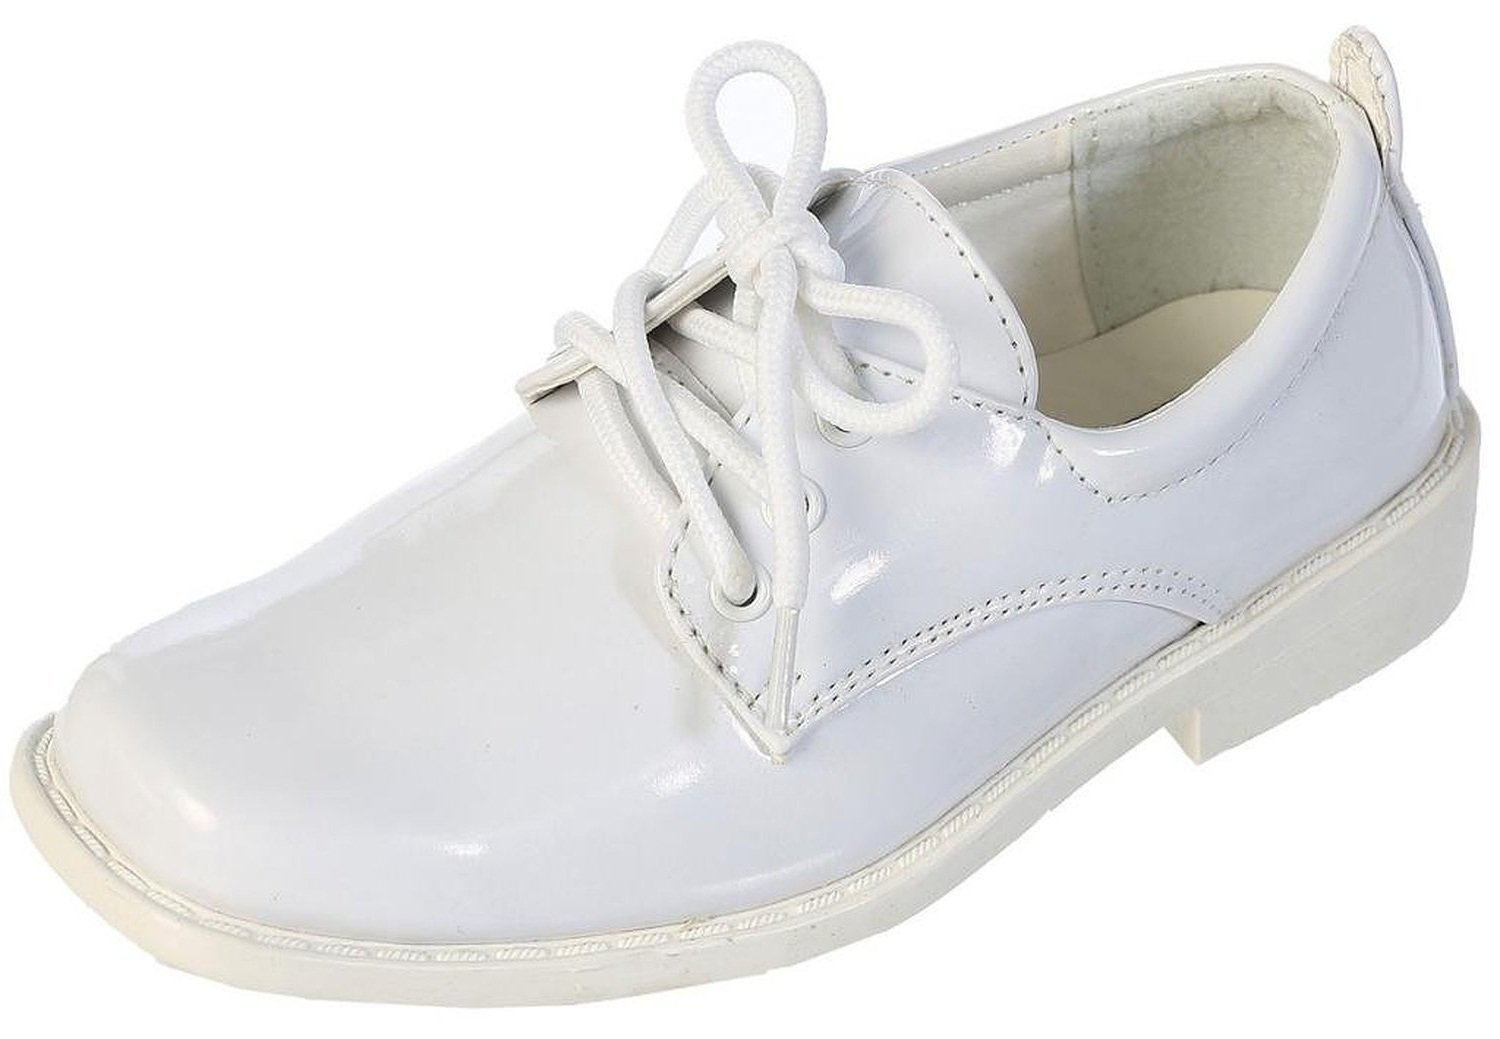 Boys Square Toe Lace Up Oxford Patent Dress Shoes - Available in White 5 Big Kid